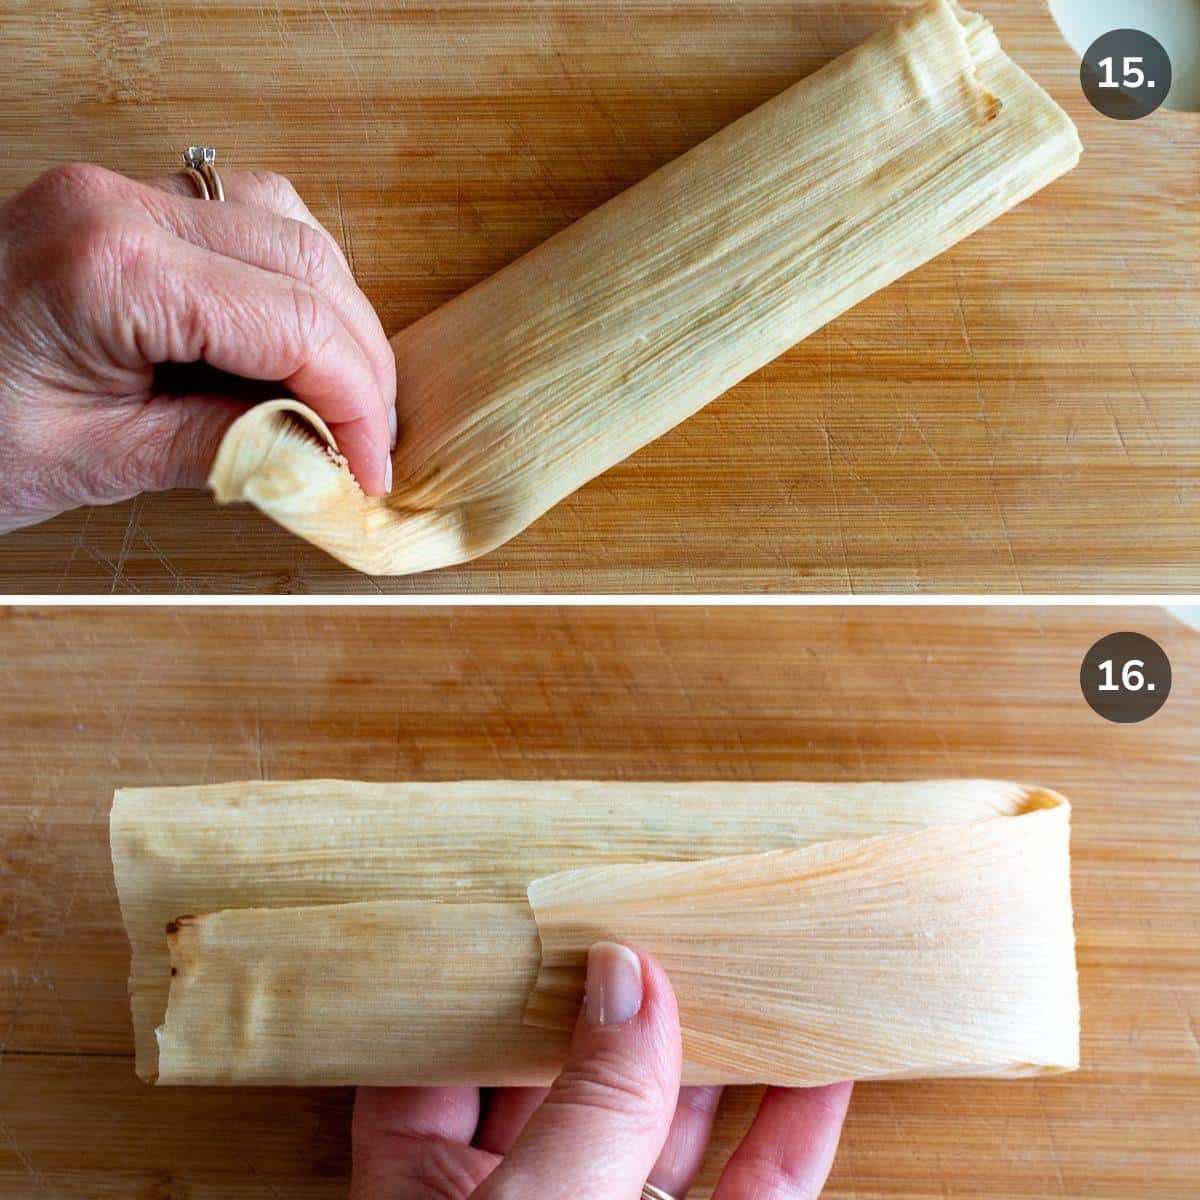 Folding the small end of the vegetarian tamale over the end. 